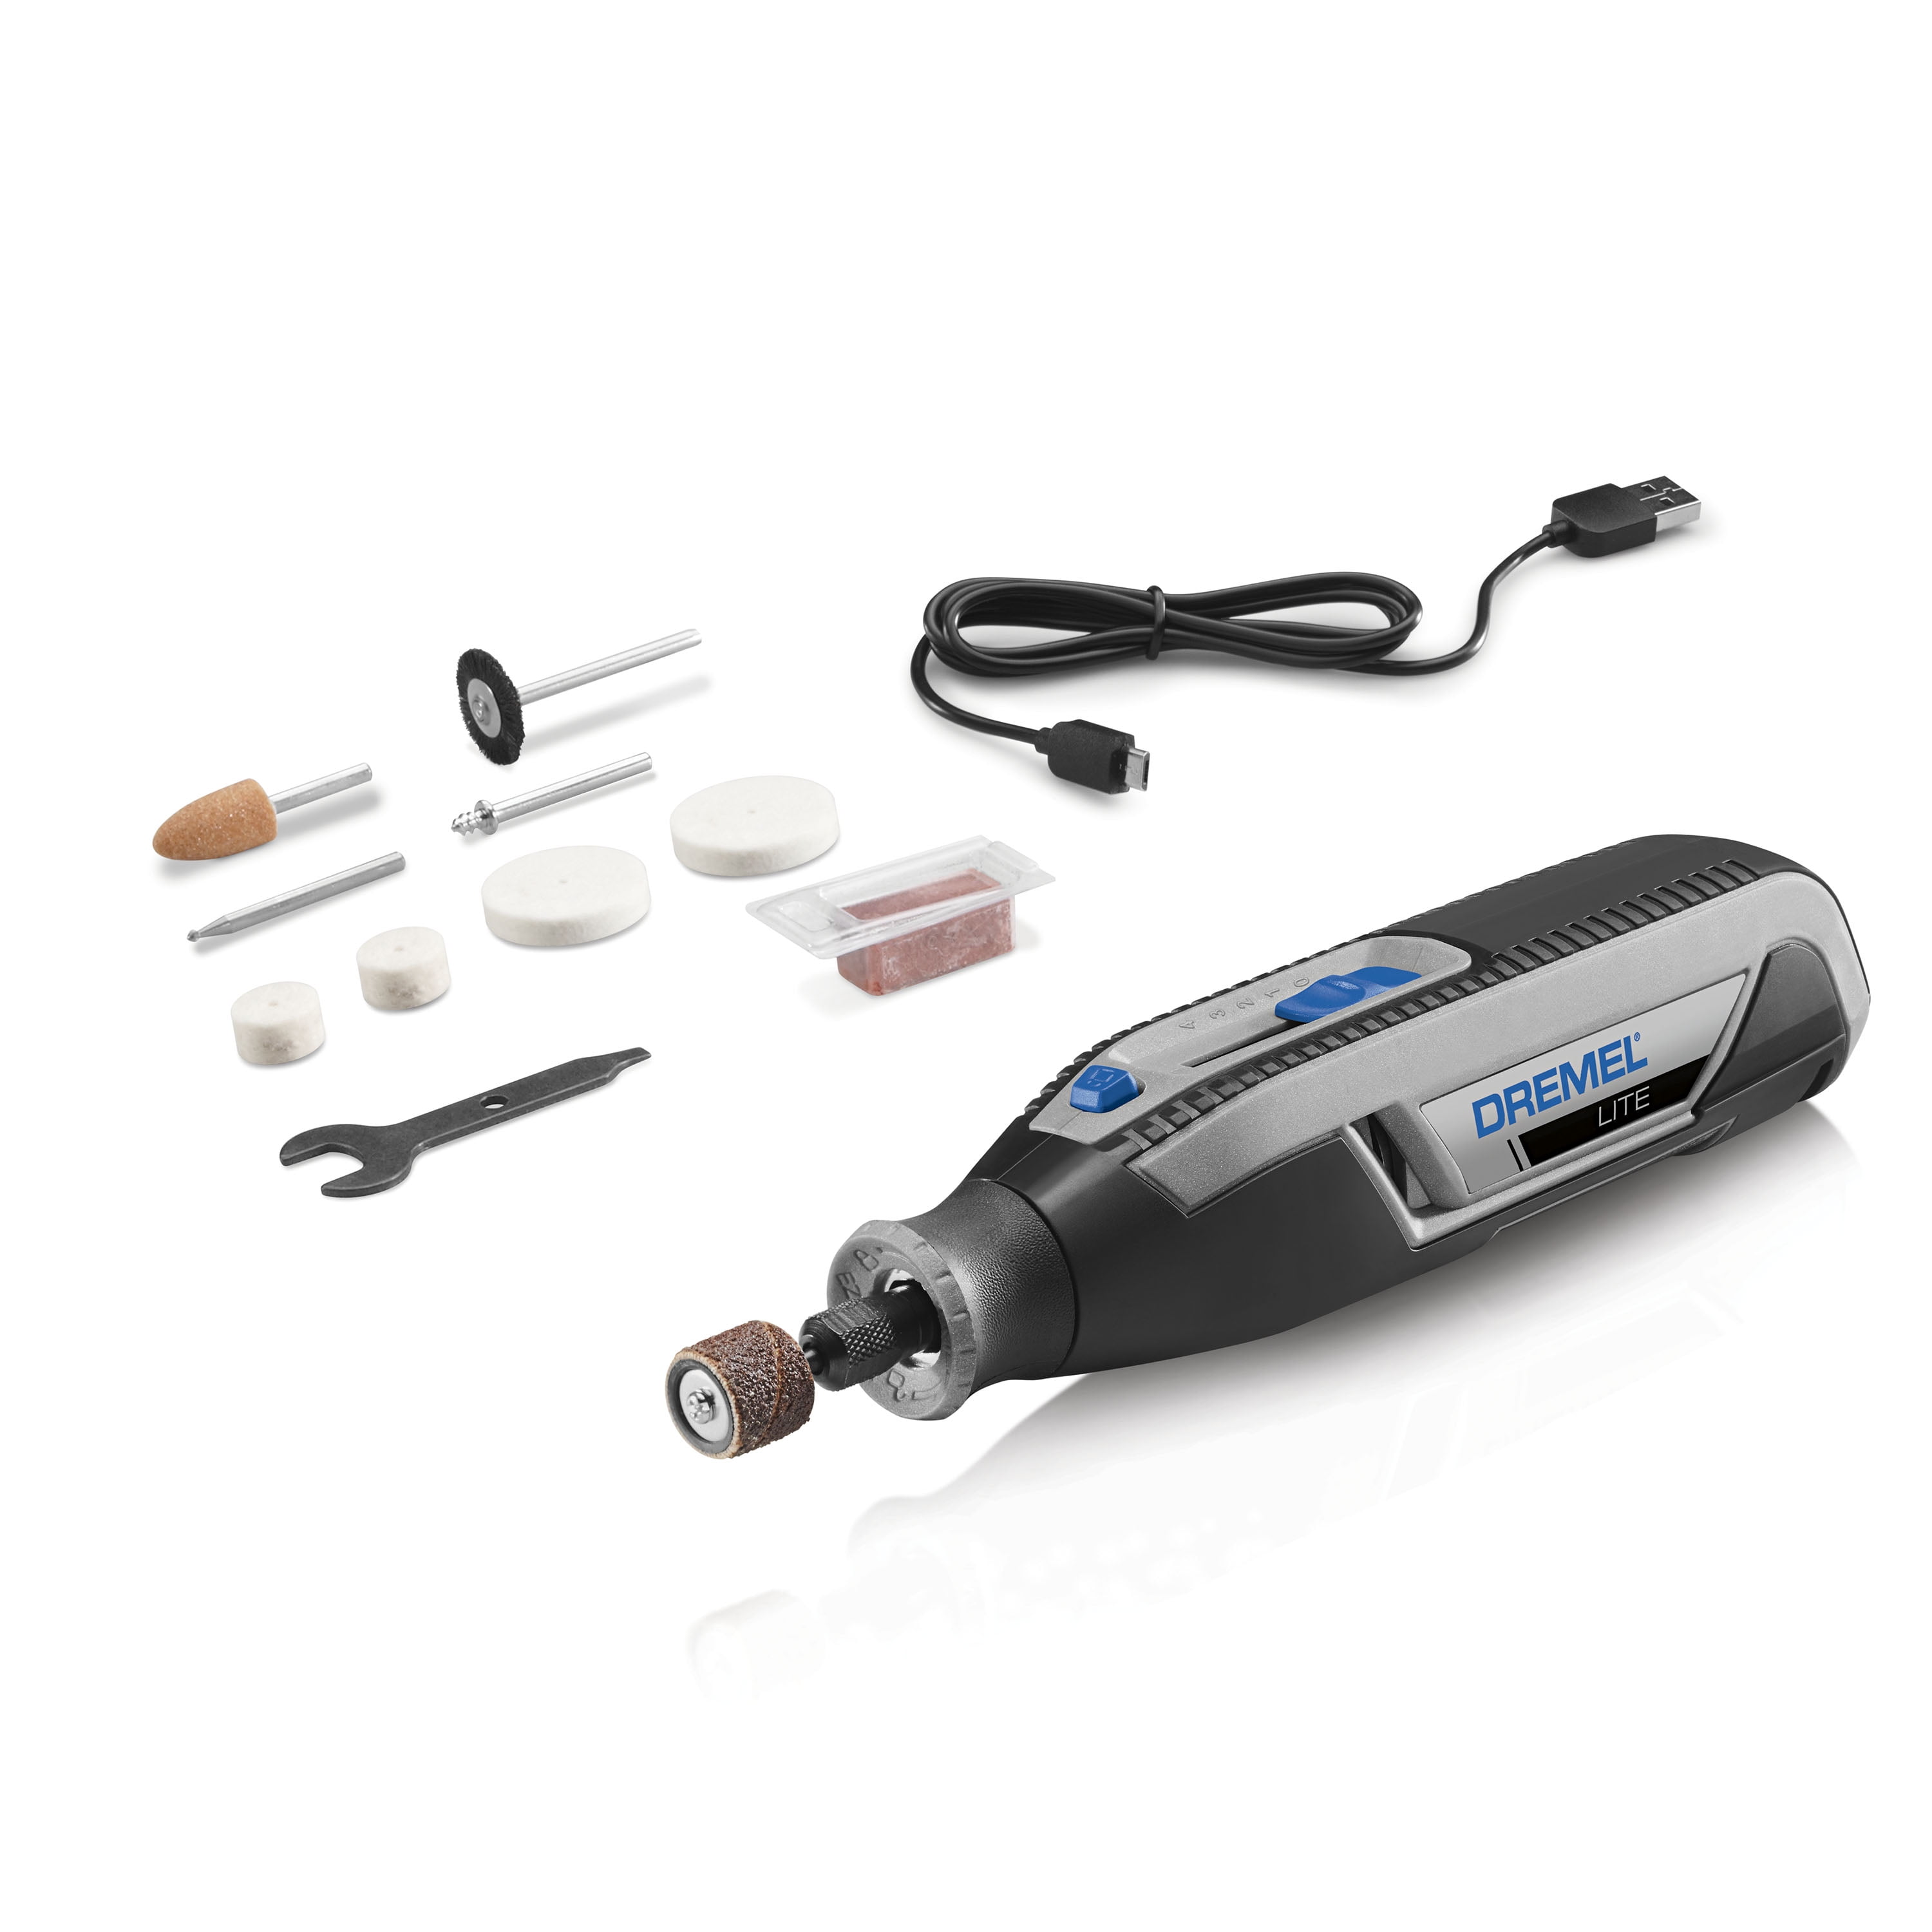 Dremel 7760-N/10W 4V Lite Lithium Ion Cordless Rotary Tool with 10 Accessories USB Charged, Variable Speed Multi-Purpose Rotary Tool Kit, Perfect For Light-Duty DIY & Crafting